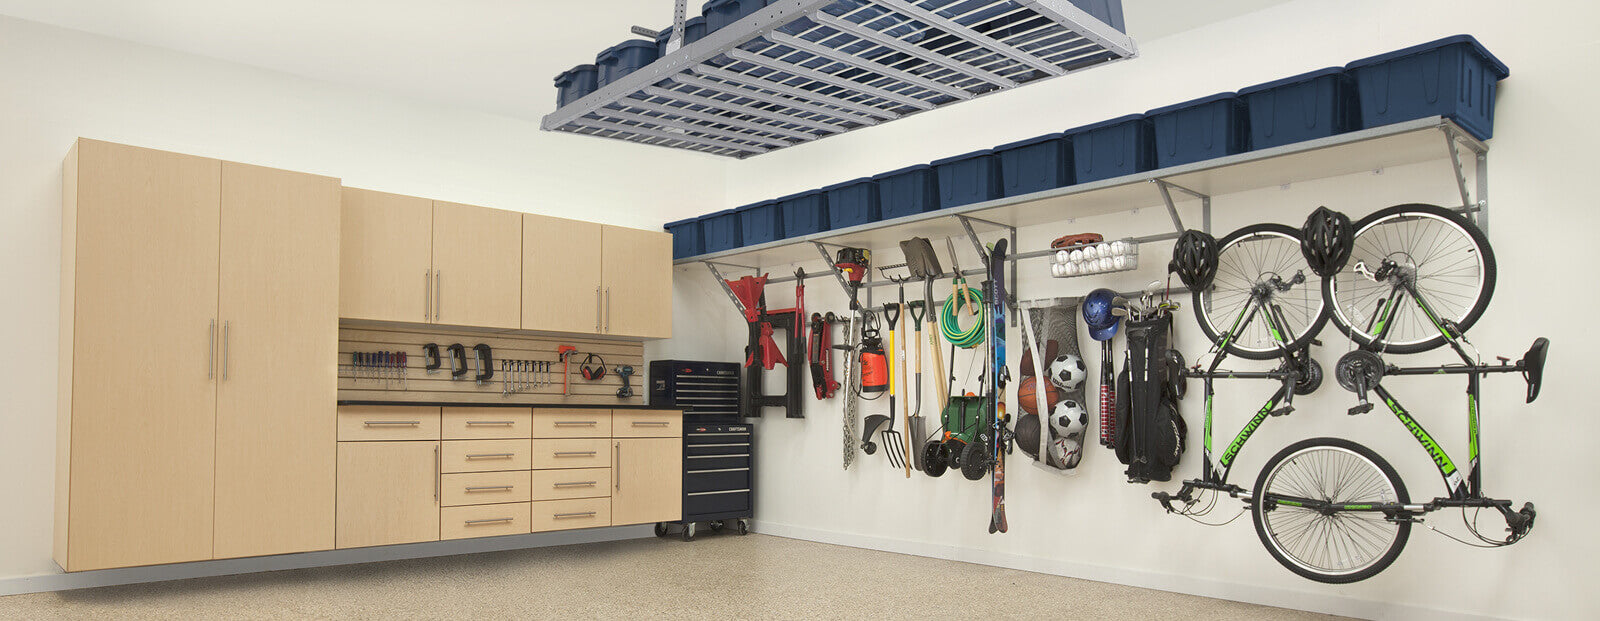 5 Essential Tips for Prepping Your Garage for Efficient Storage